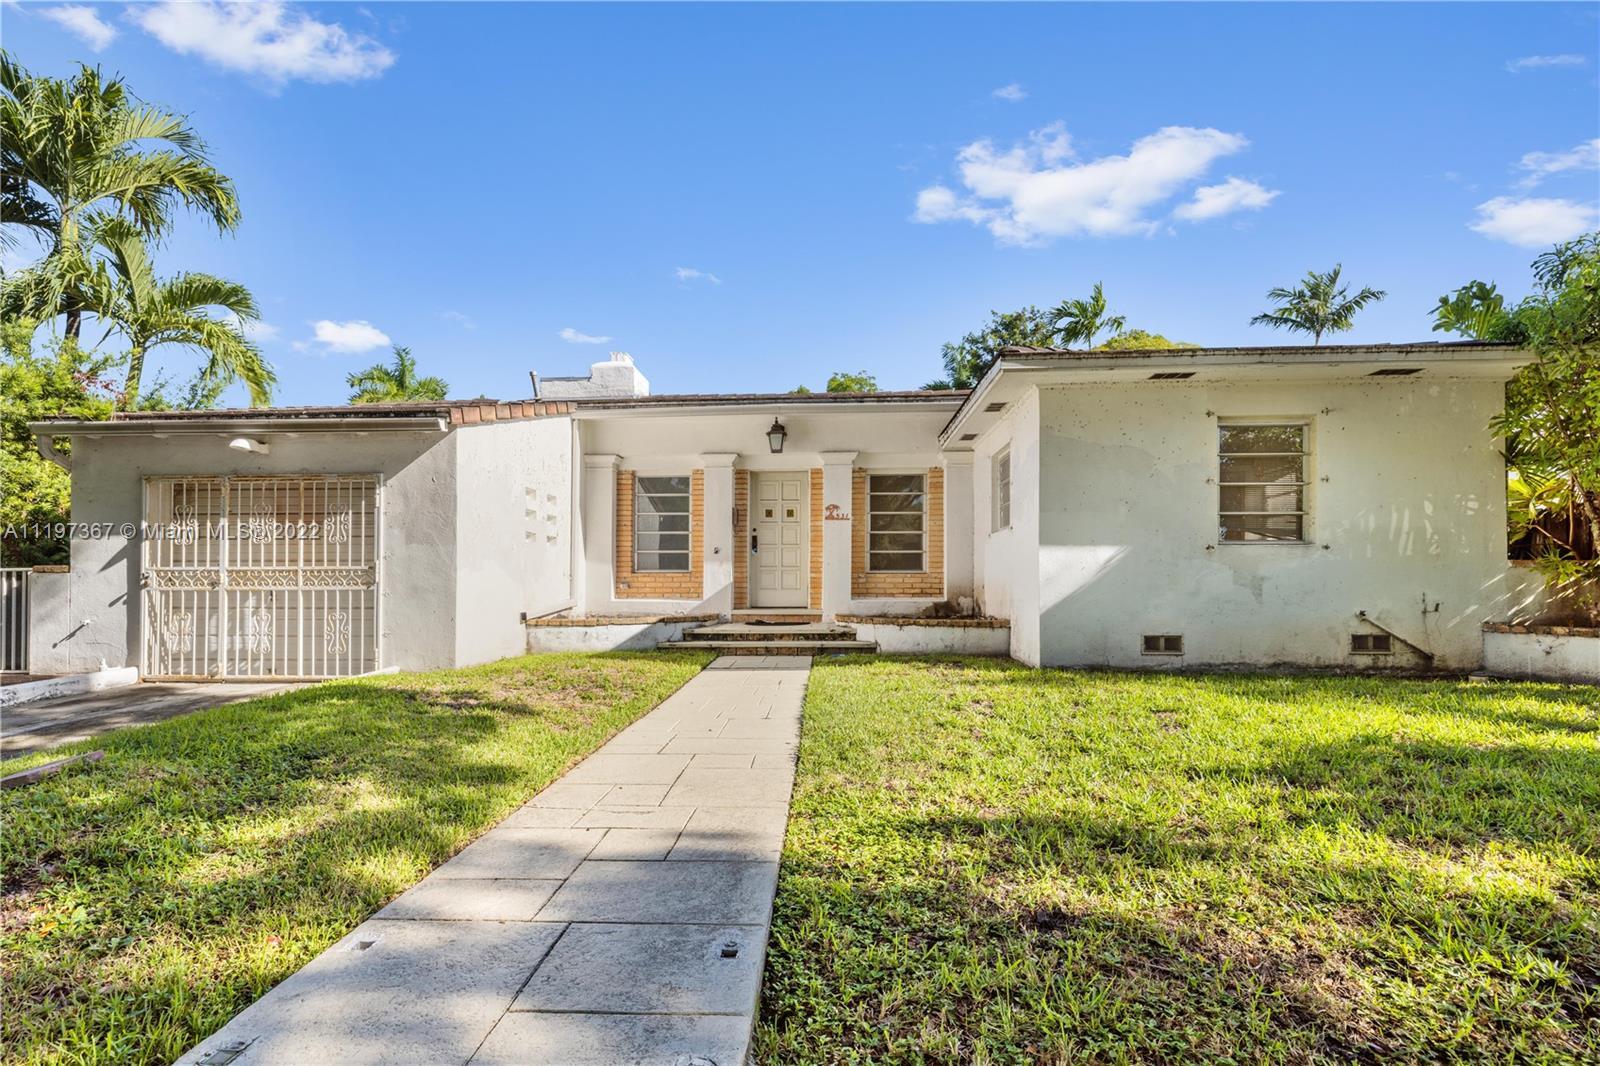 AMAZING OPPORTUNITY WITH THIS BLANK CANVAS NESTLED IN THE DESIRED HISTORIC MORNINGSIDE GATED COMMUNI